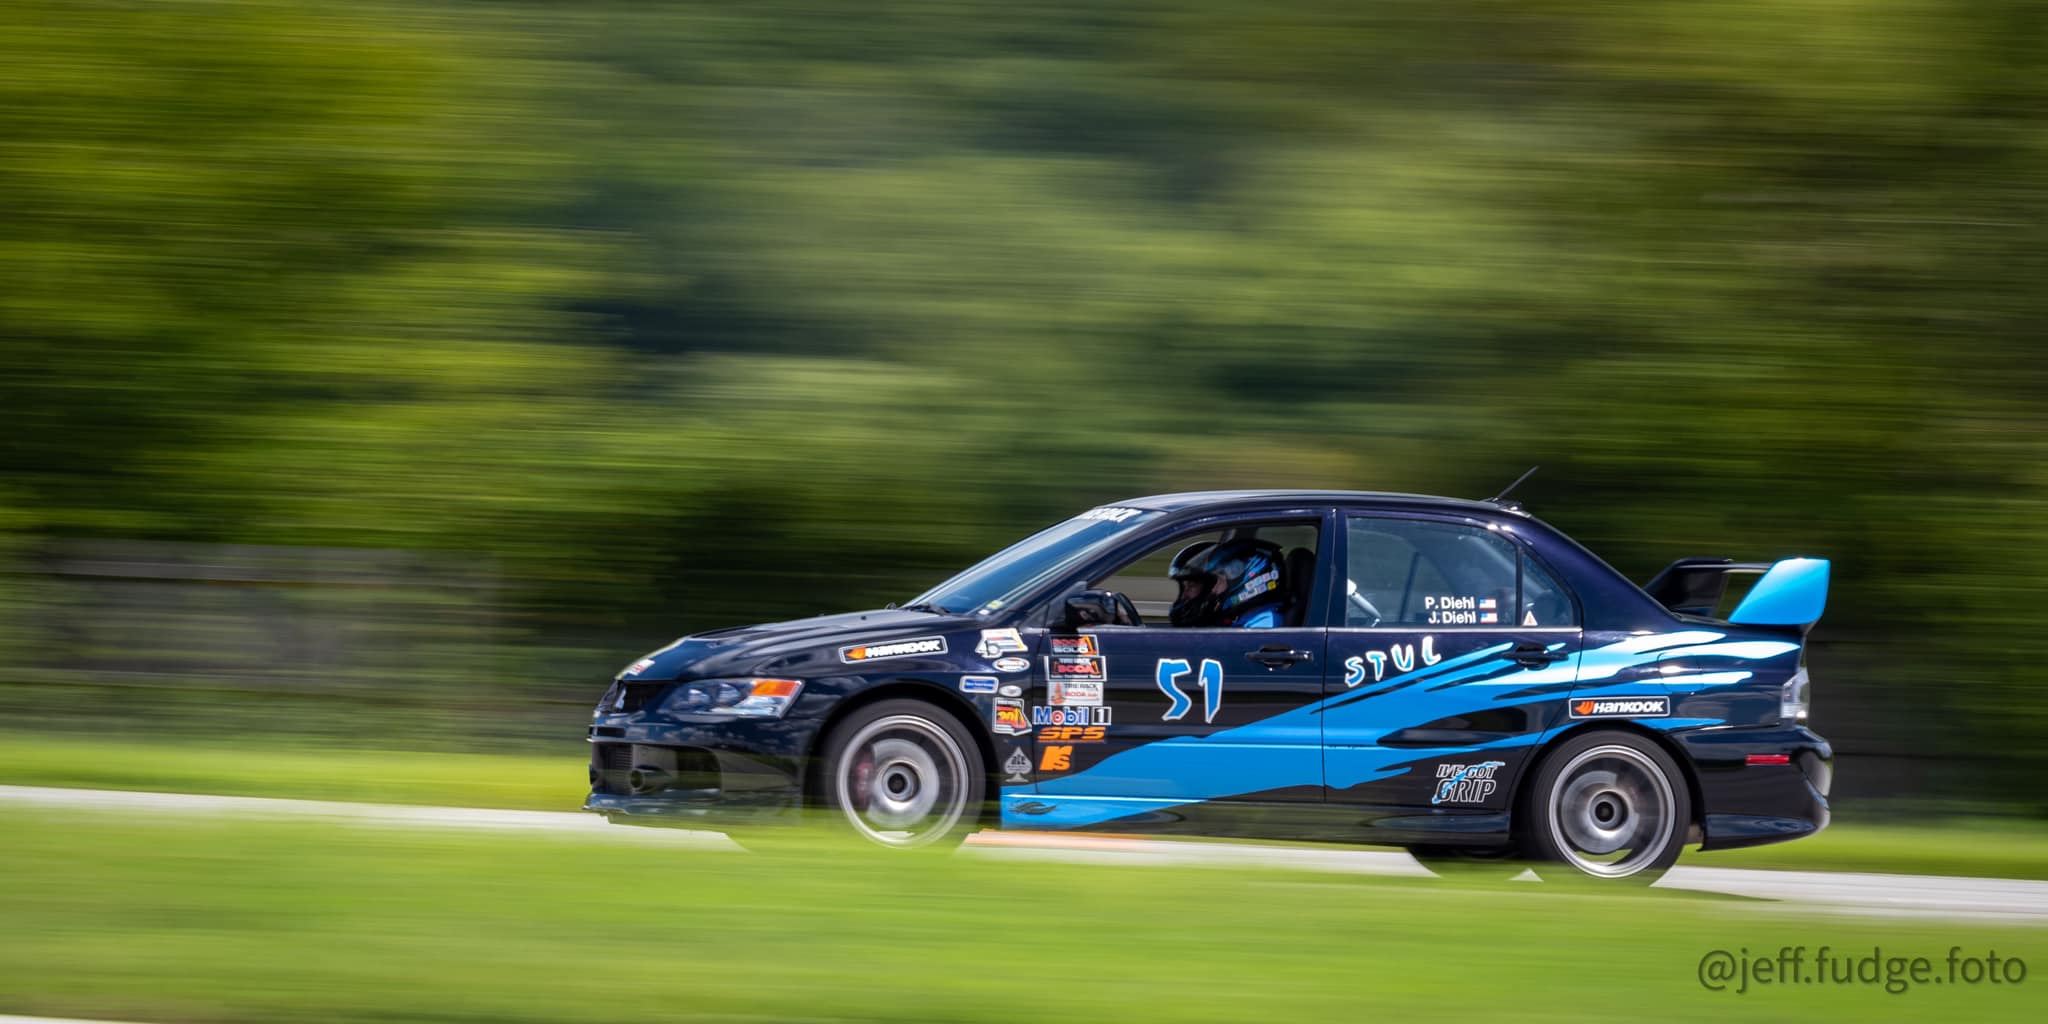 Racing at 2022 KCR Autocross Event # 6 photo by Jeff Fudge